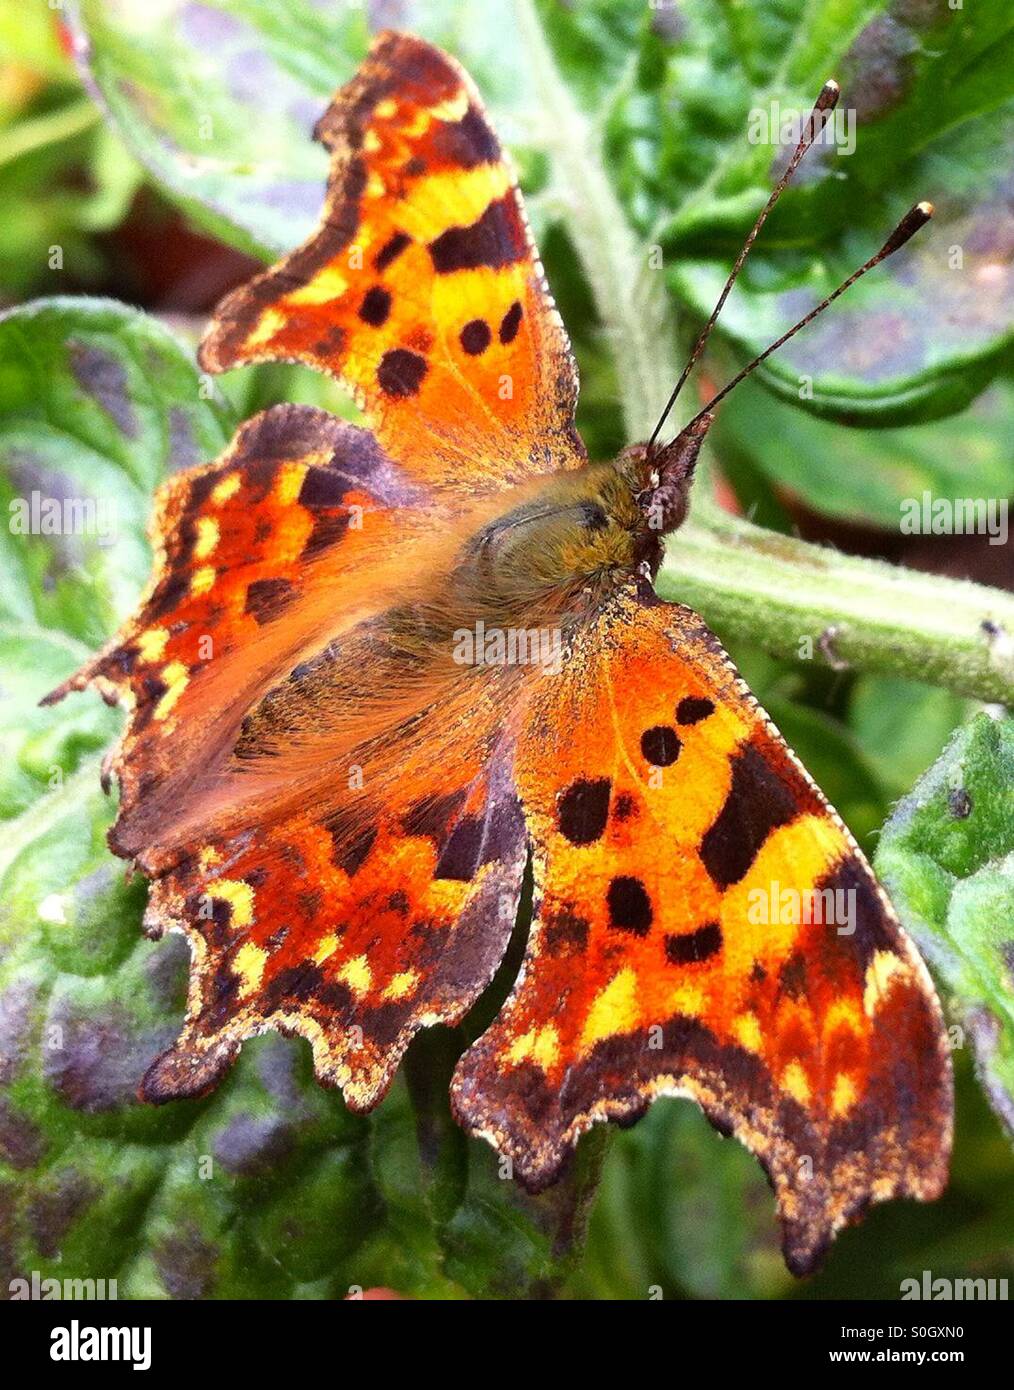 Comma butterfly pn tomato plant. Stock Photo